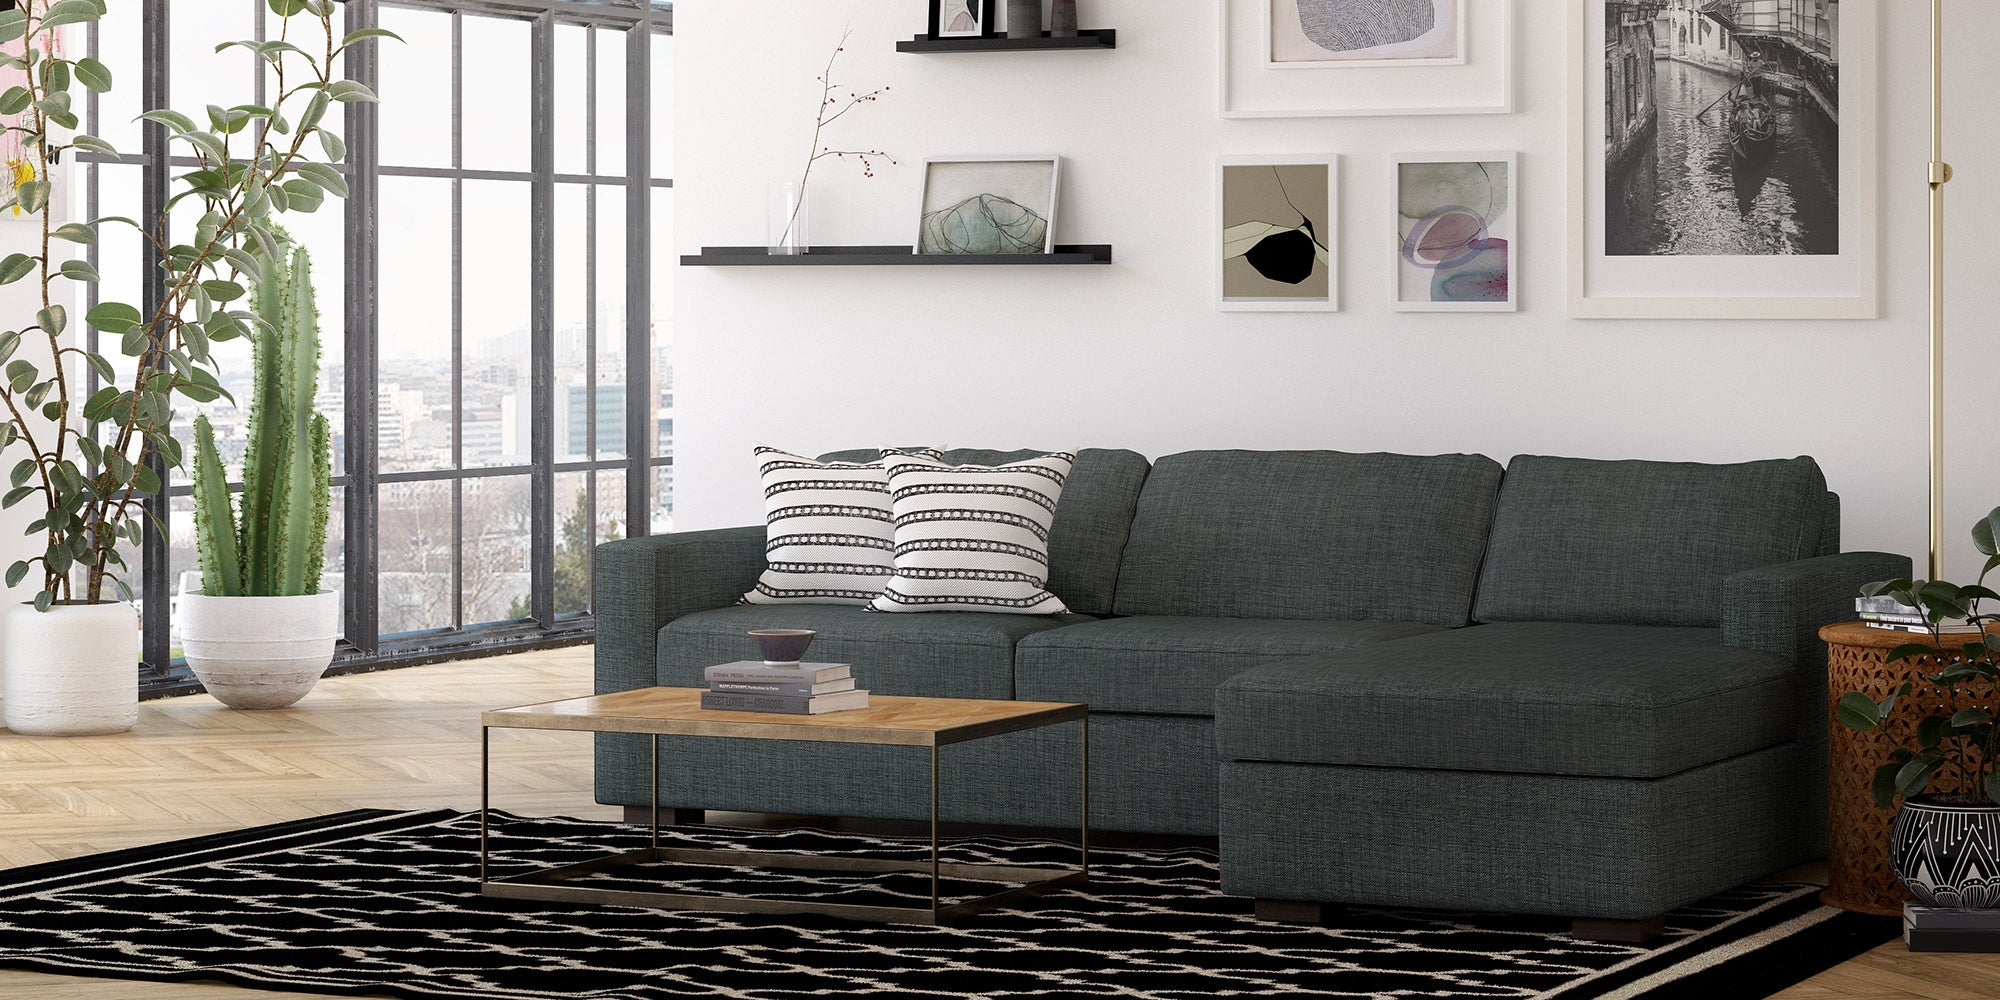 IRL: Rio Chaise Right Queen Sleeper Sectional, shown here in Macarena Smoke fabric and Dave Cafe legs.